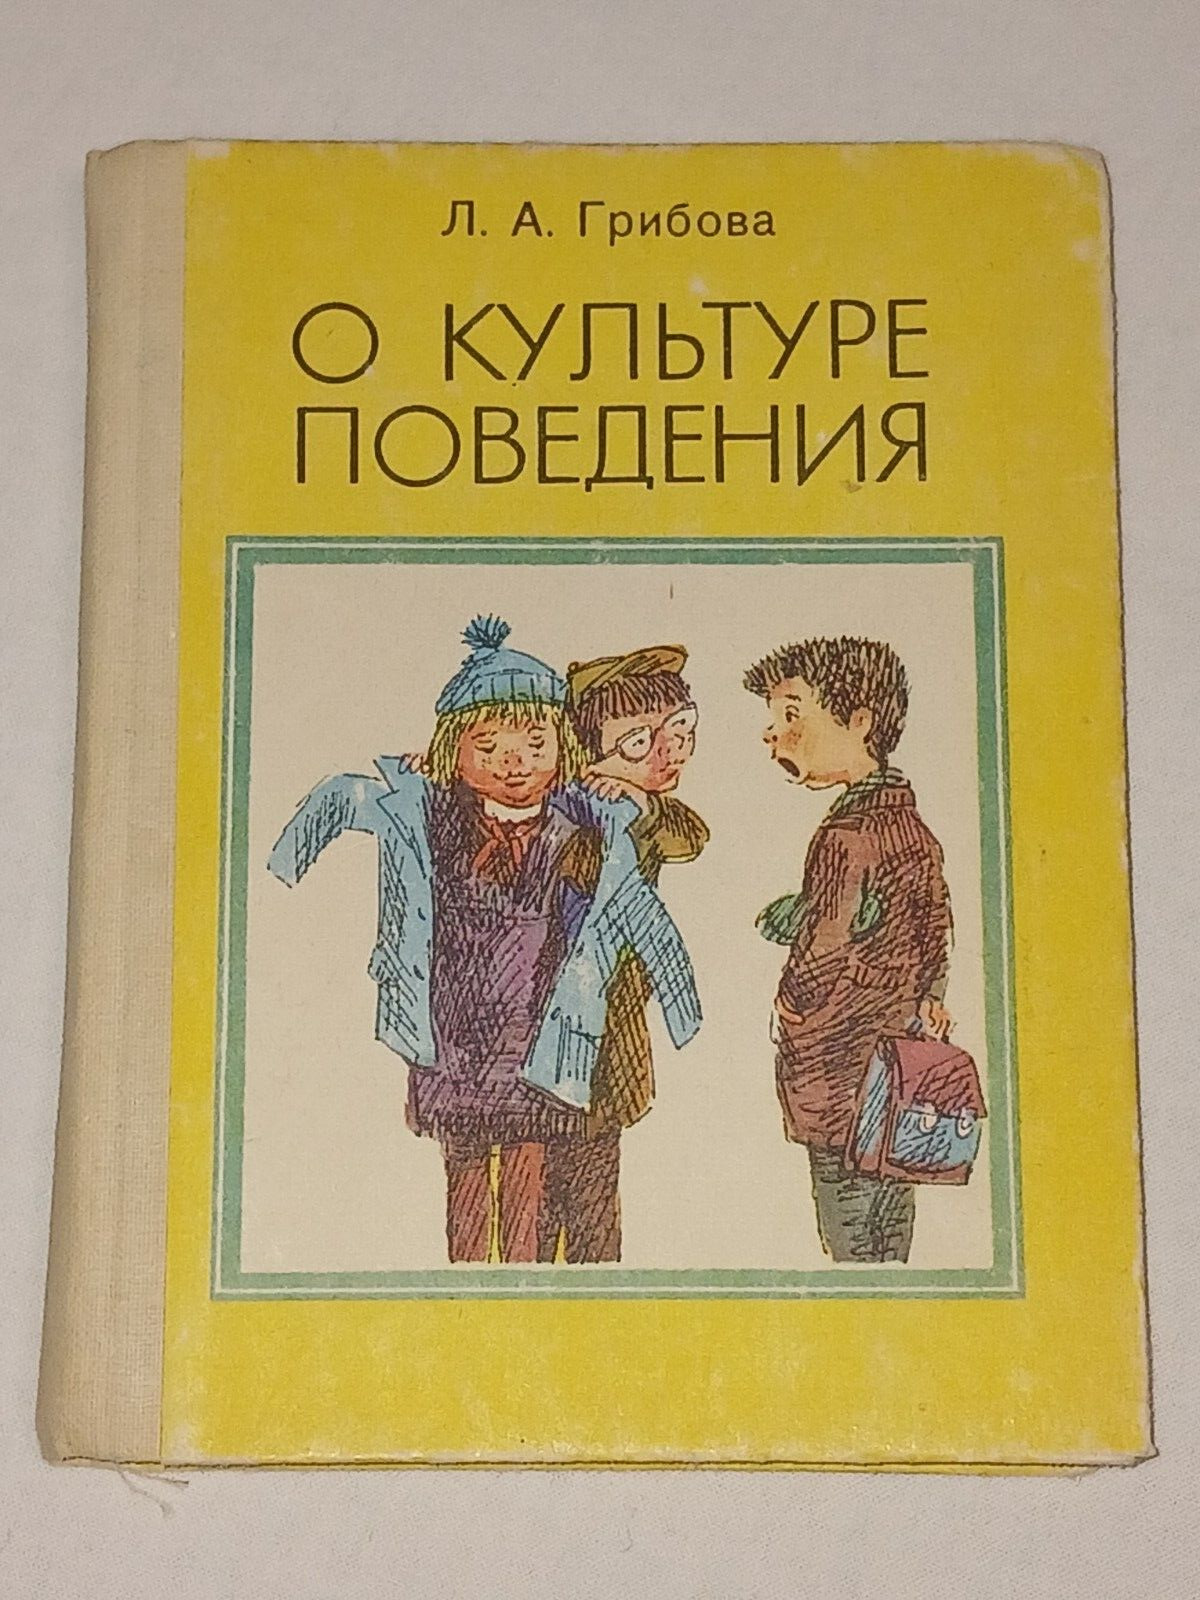 1983 About the culture of behavior. Vintage Soviet children\'s book USSR in Russi